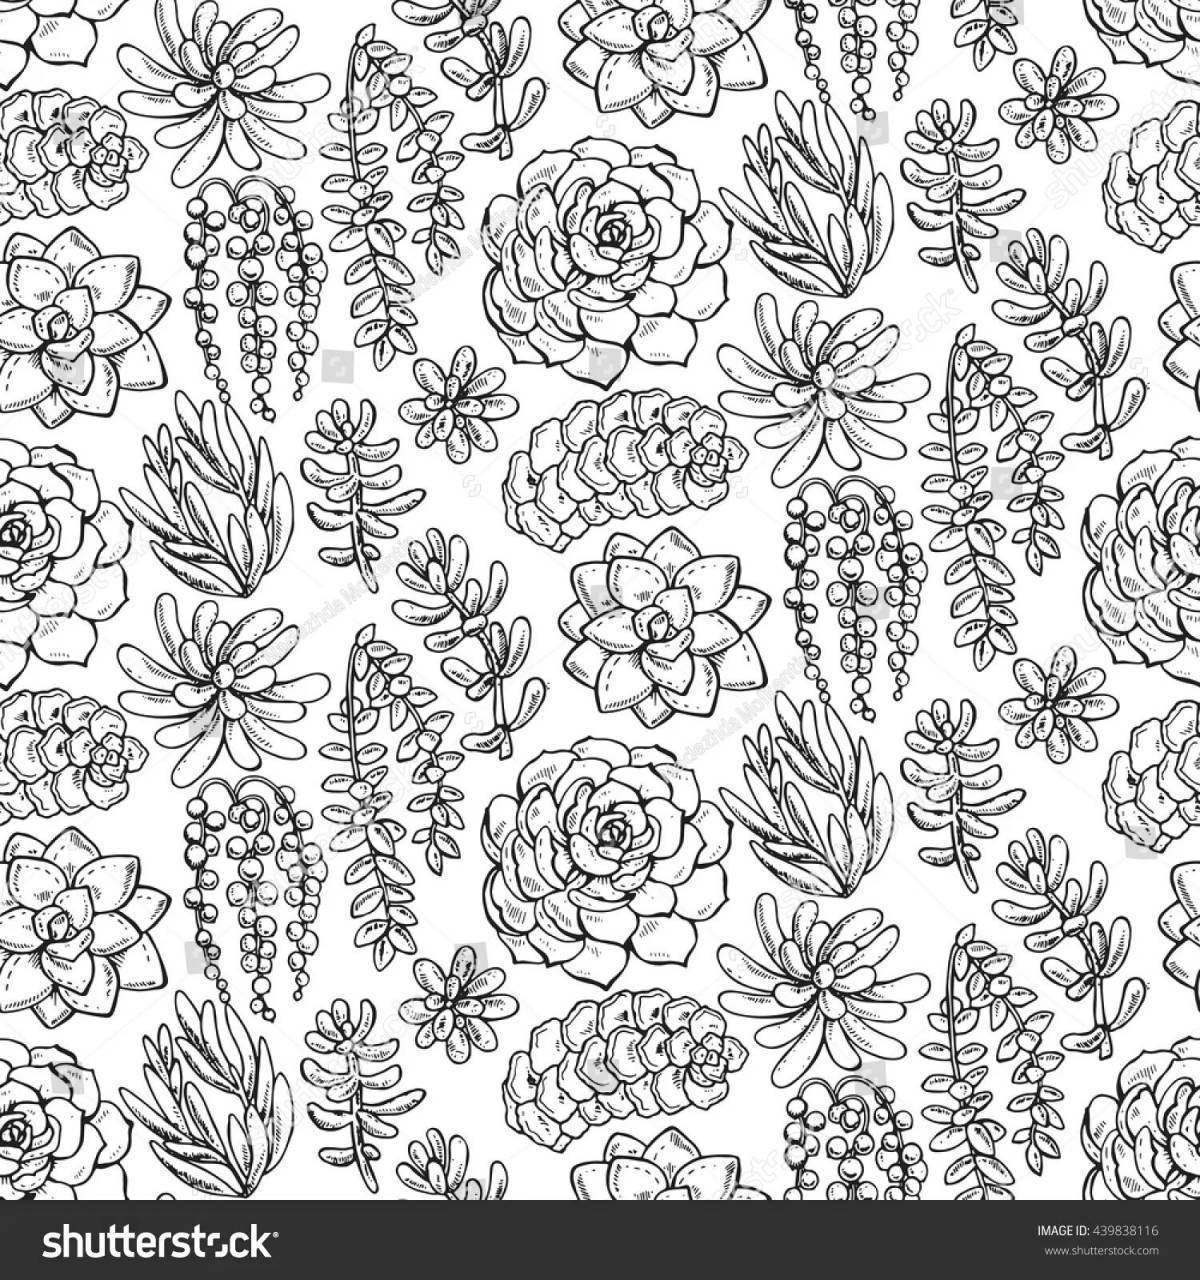 Succulents in bloom coloring pages